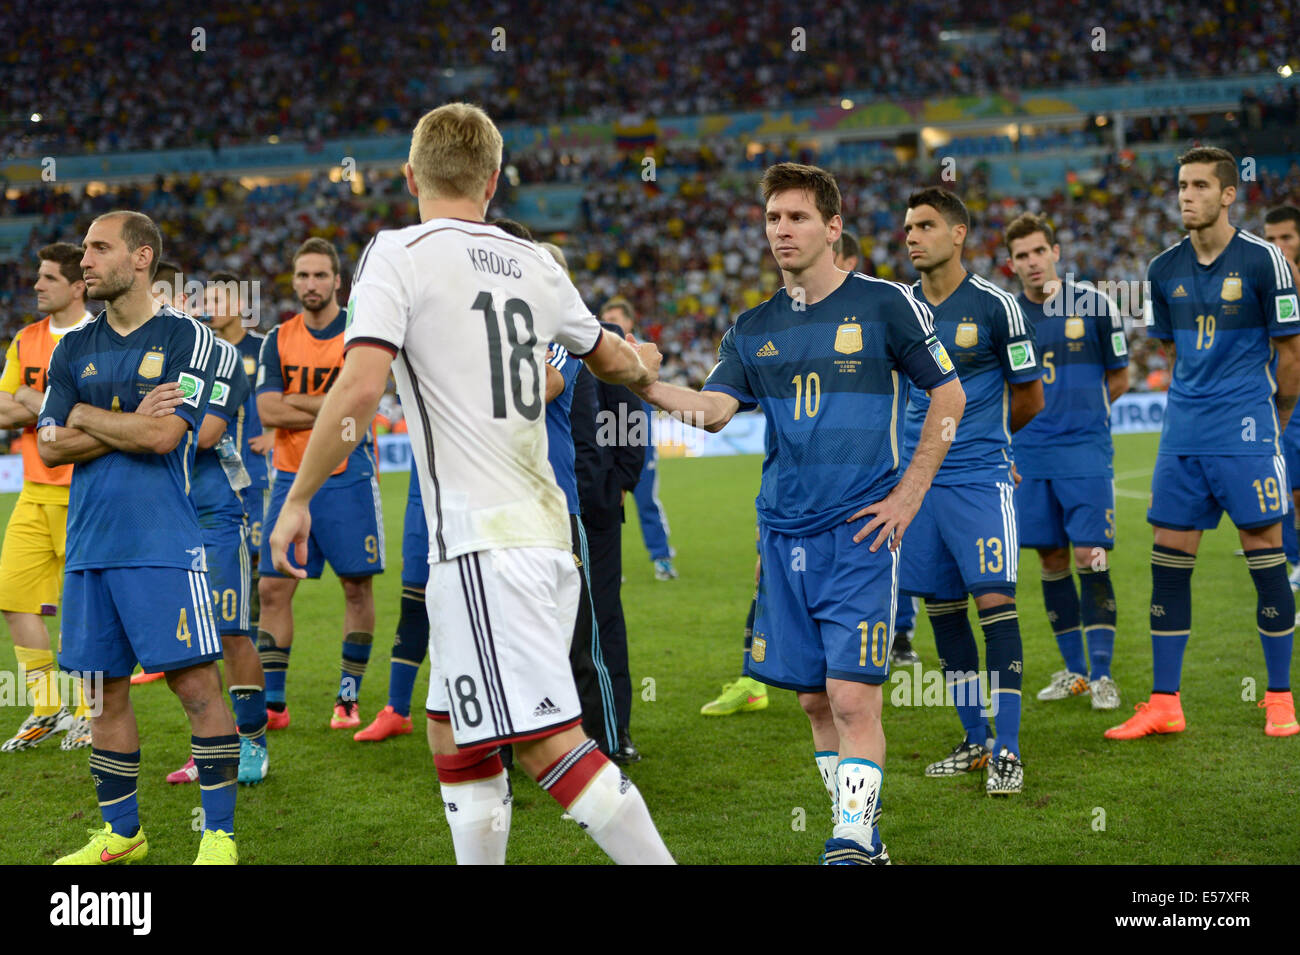 Rio De Janeiro, Brazil. 13th July, 2014. Toni Kroos (GER), Lionel Messi (ARG) Football/Soccer : Lionel Messi of Argentina shakes hands with Toni Kroos of Germany as Argentina players look dejected after the FIFA World Cup Brazil 2014 Final match between Germany 1-0 Argentina at Estadio do Maracana in Rio De Janeiro, Brazil . © FAR EAST PRESS/AFLO/Alamy Live News Stock Photo